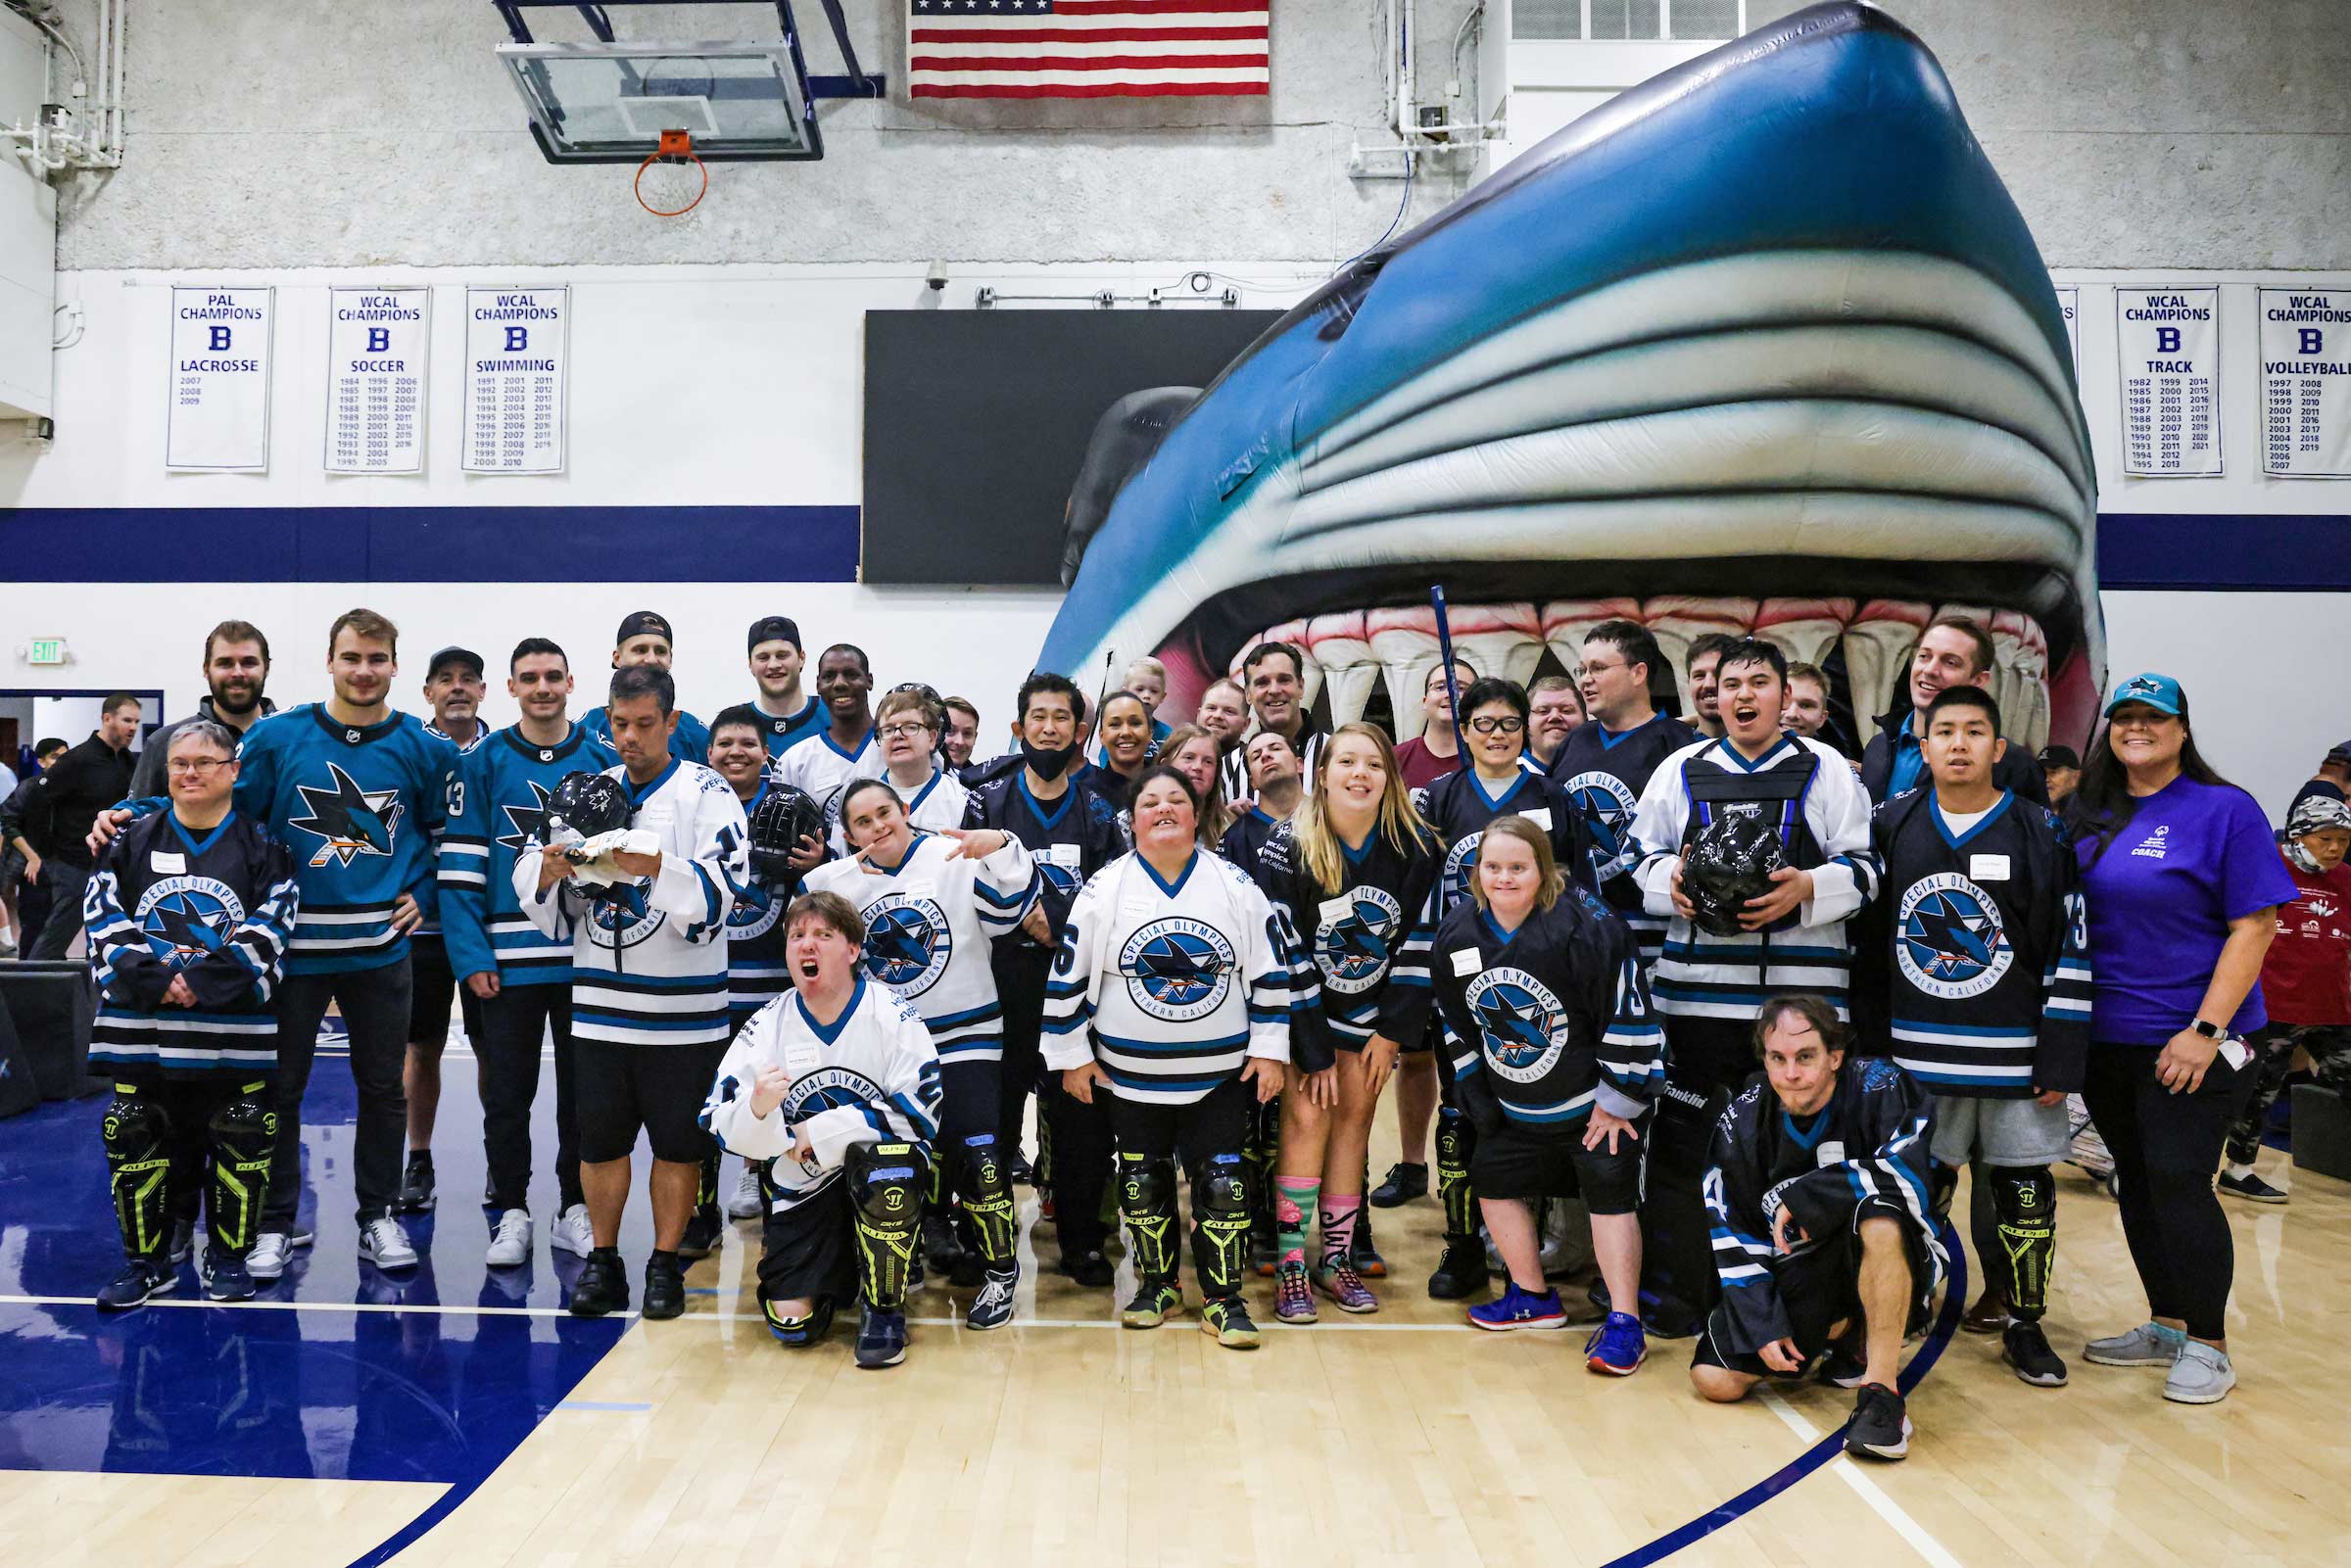 Sharks players in a gymnasium with hockey players from the Special Olympics of Northern California dressed in Sharks gear